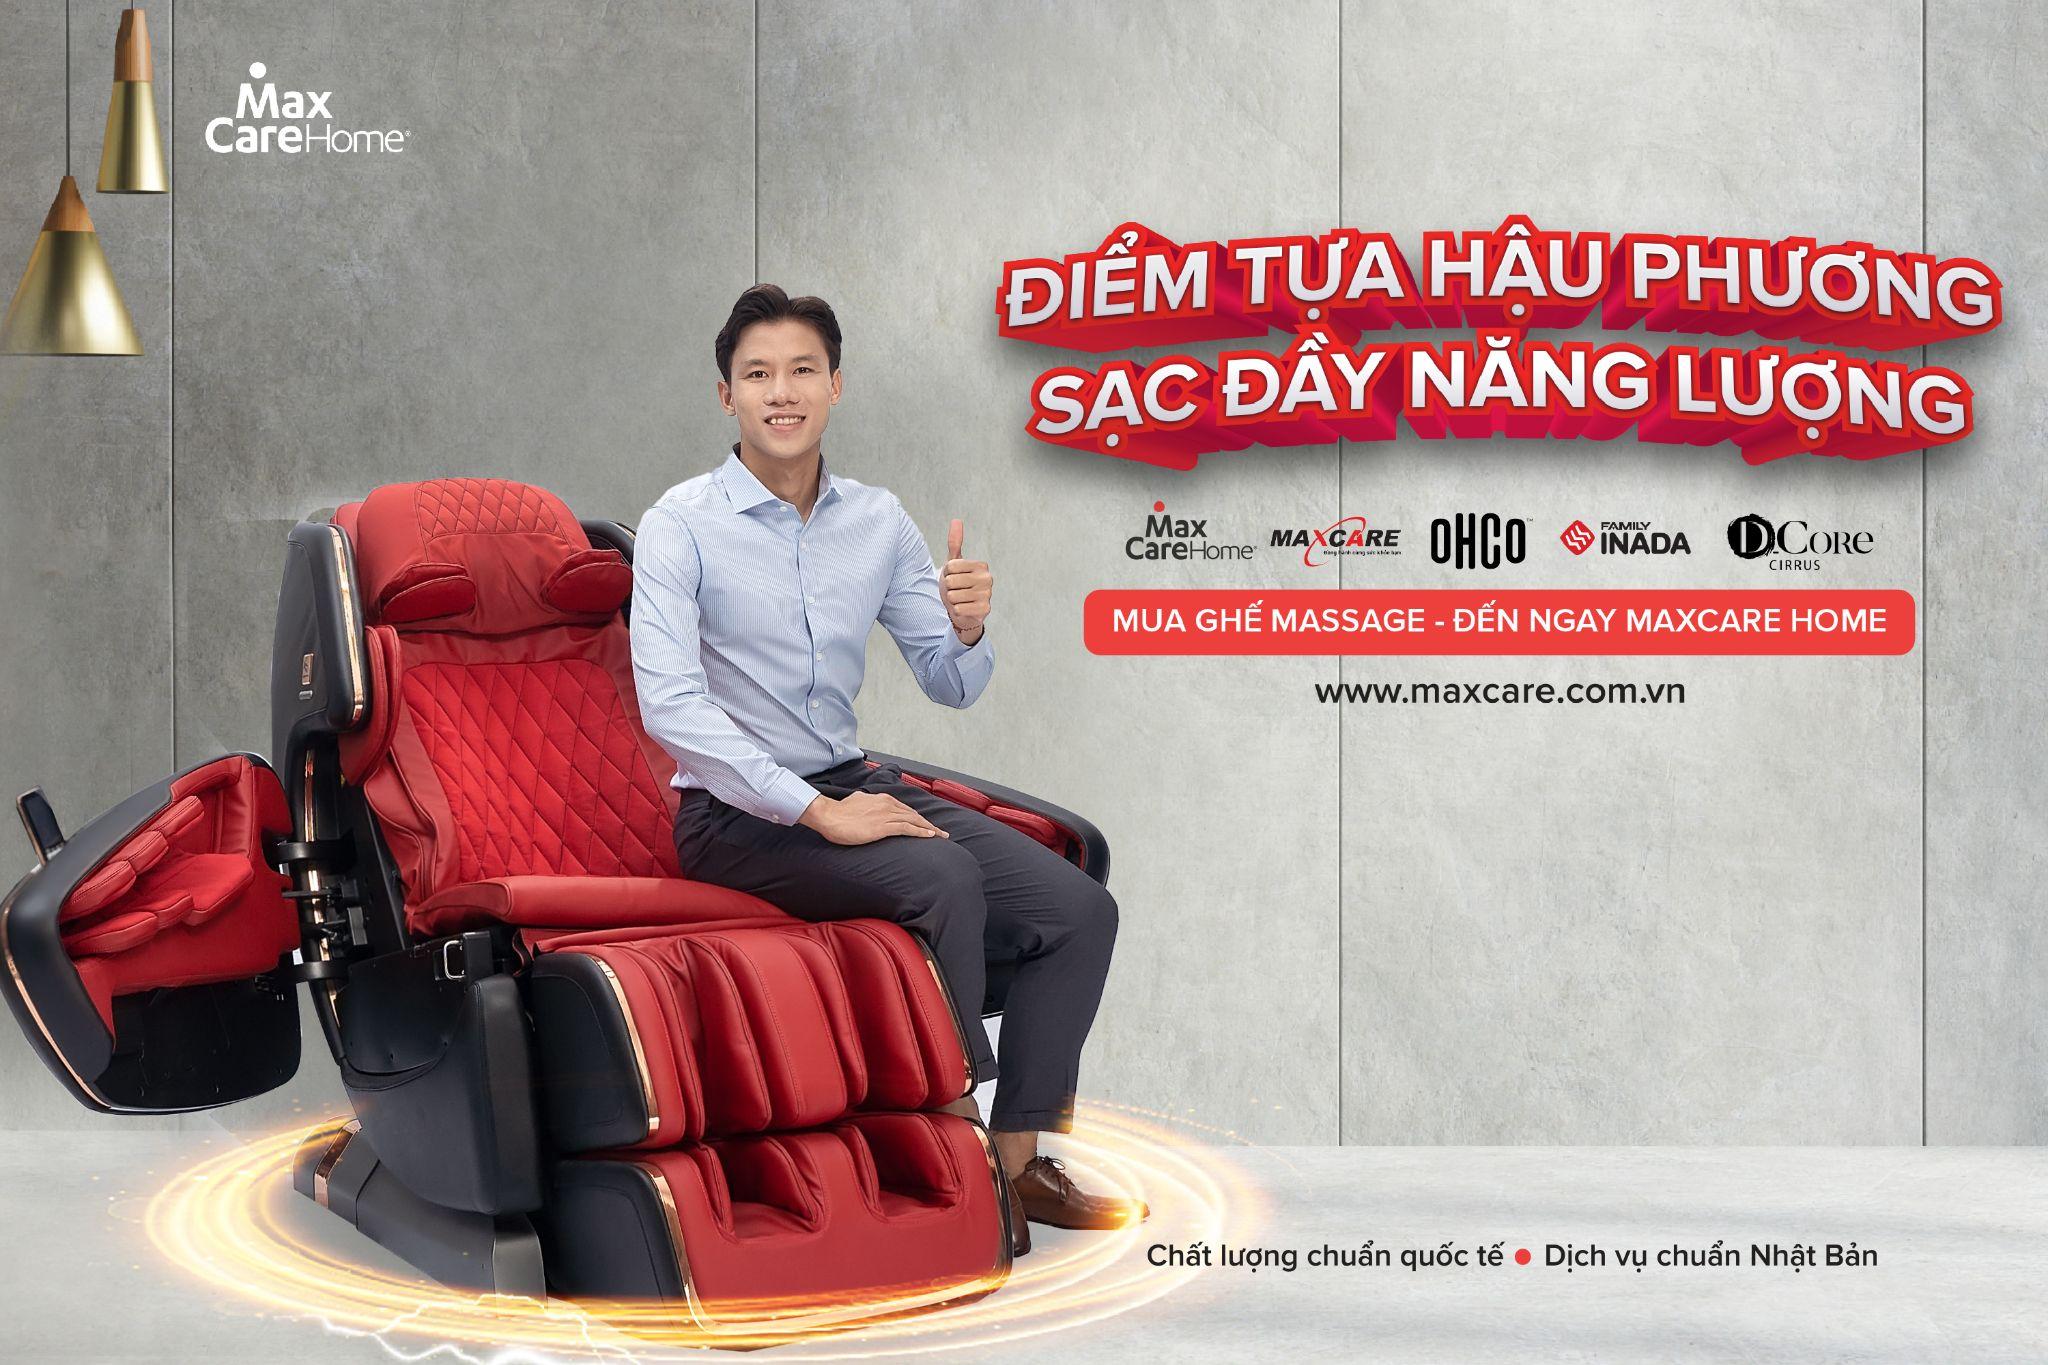 5 tips to buy luxury - standard - genuine massage chairs from MaxCare Home - 1